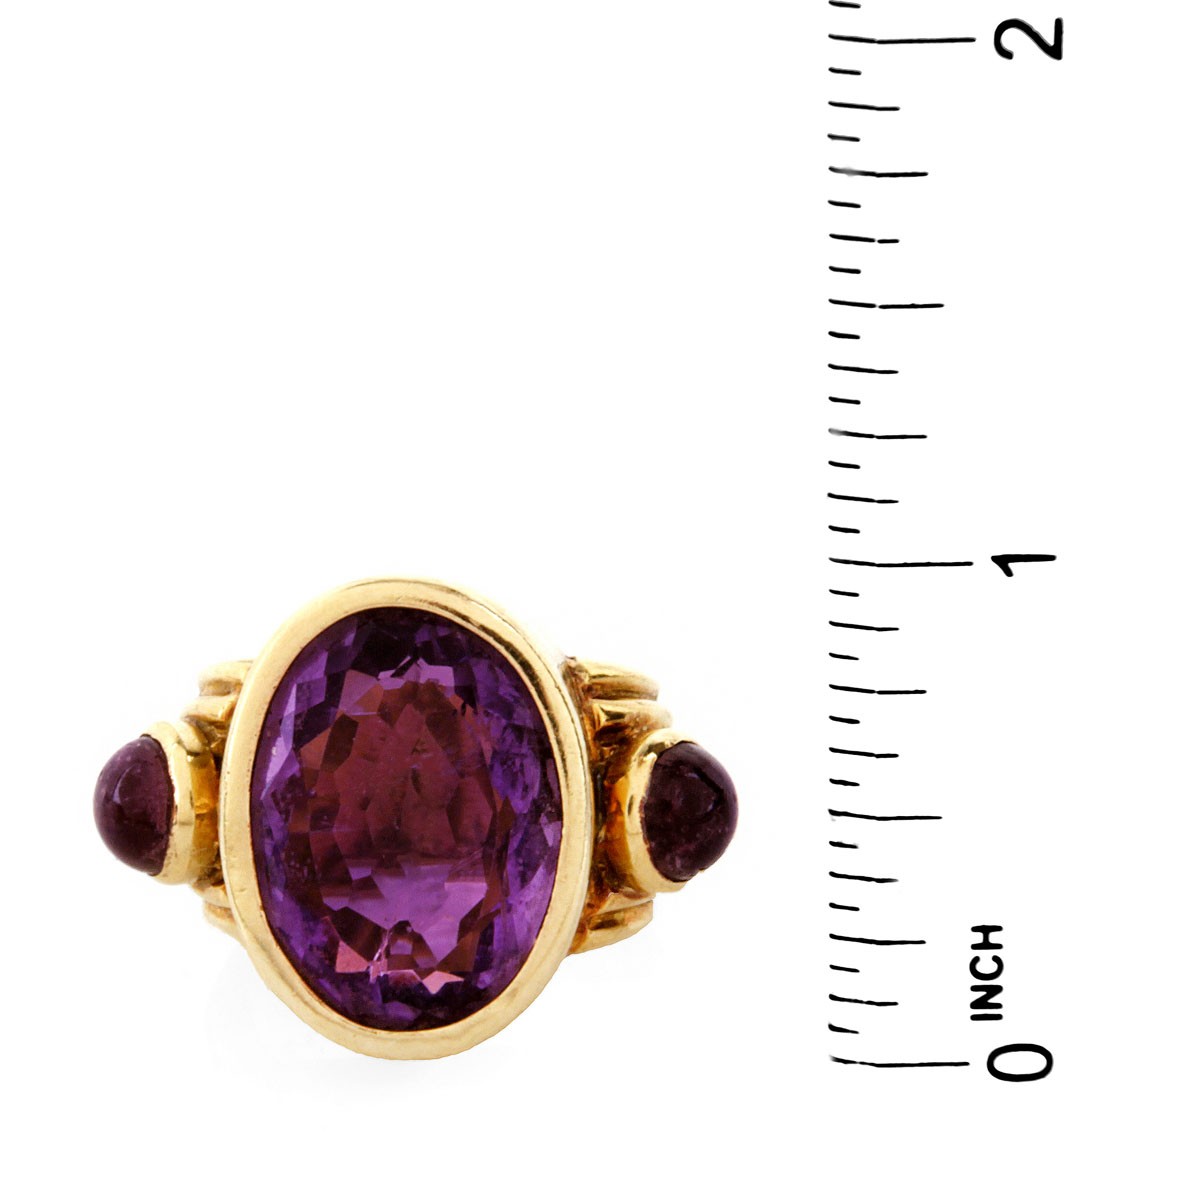 Vintage Amethyst and 18K Ring - Image 6 of 7